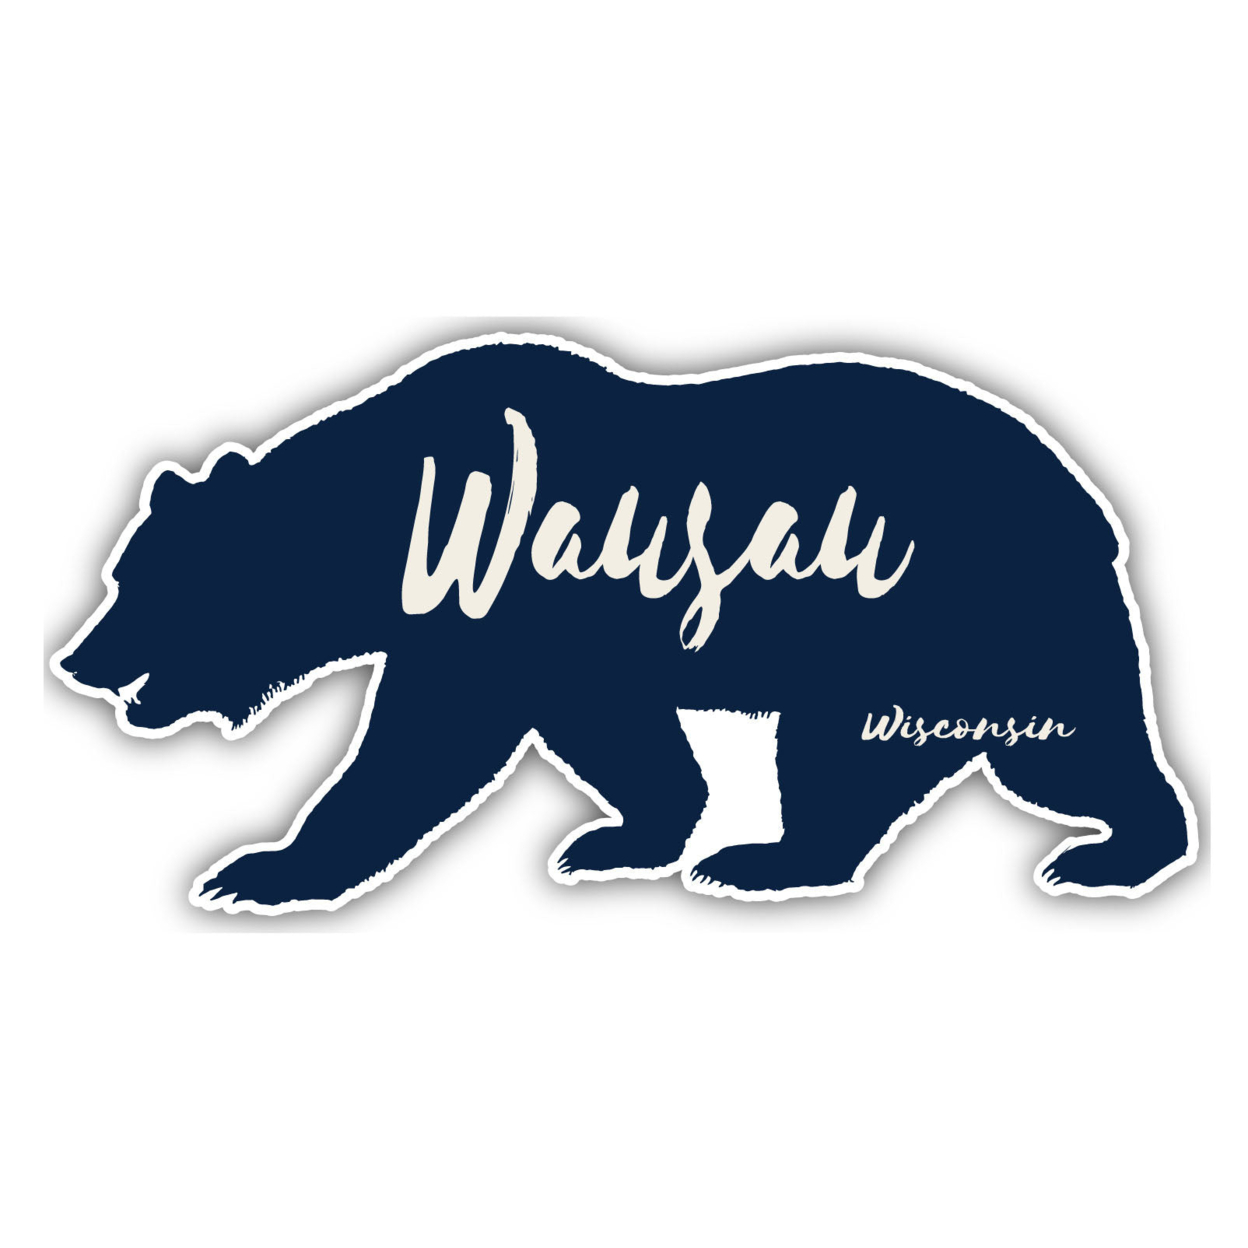 Wausau Wisconsin Souvenir Decorative Stickers (Choose Theme And Size) - Single Unit, 2-Inch, Great Outdoors